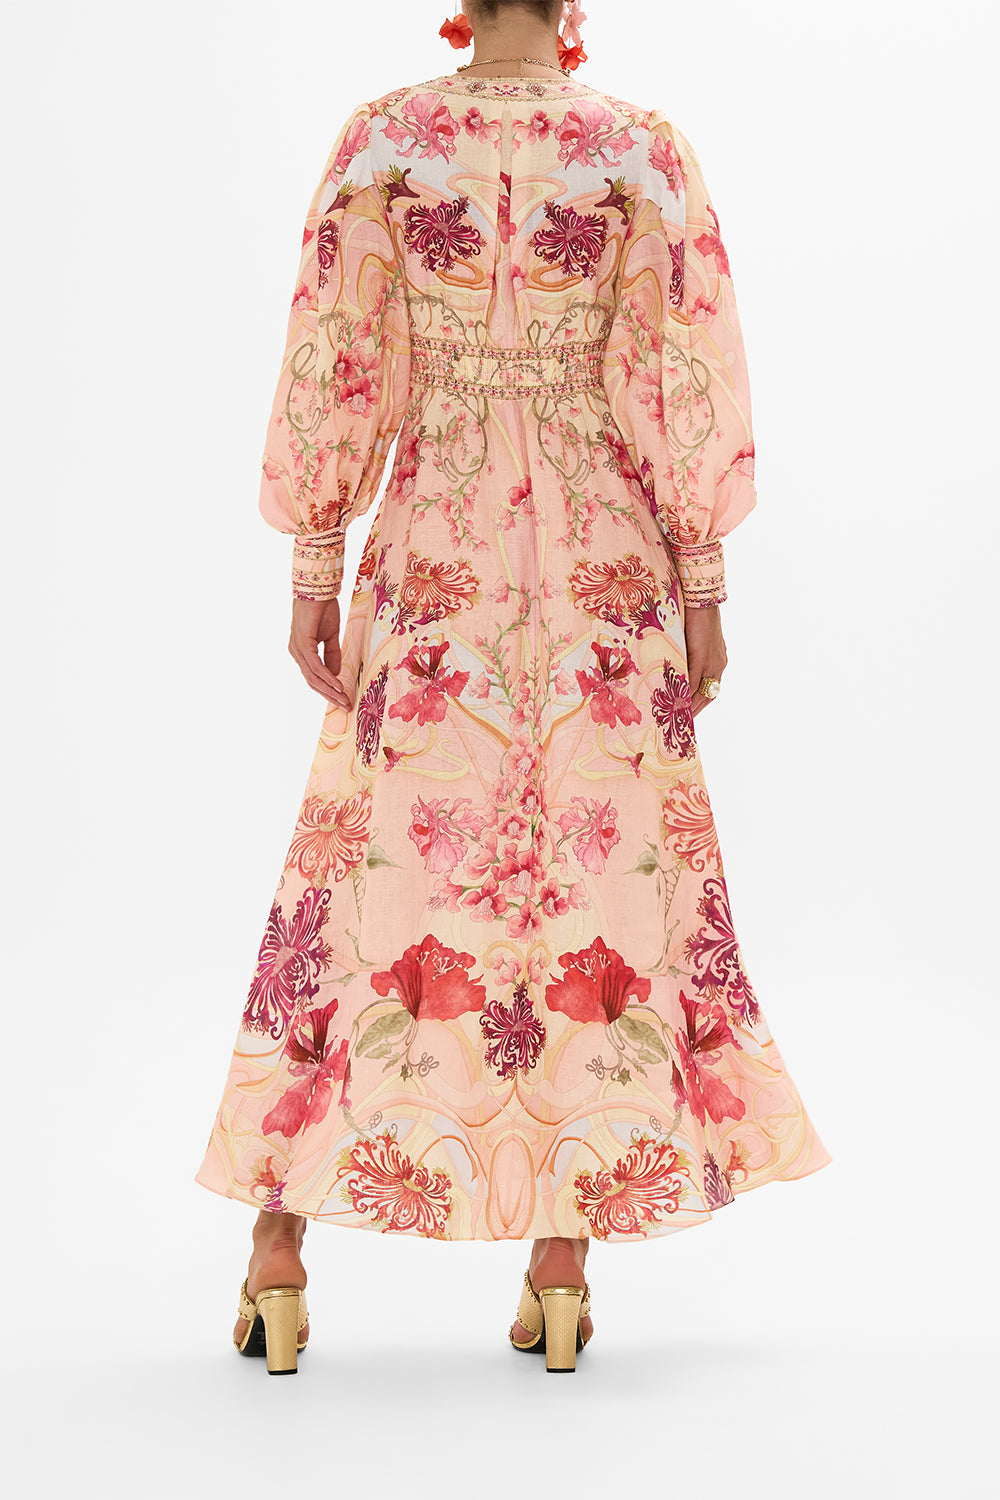 SHAPED WAISTBAND DRESS WITH GATHERED SLEEVES BLOSSOMS AND BRUSHSTROKES